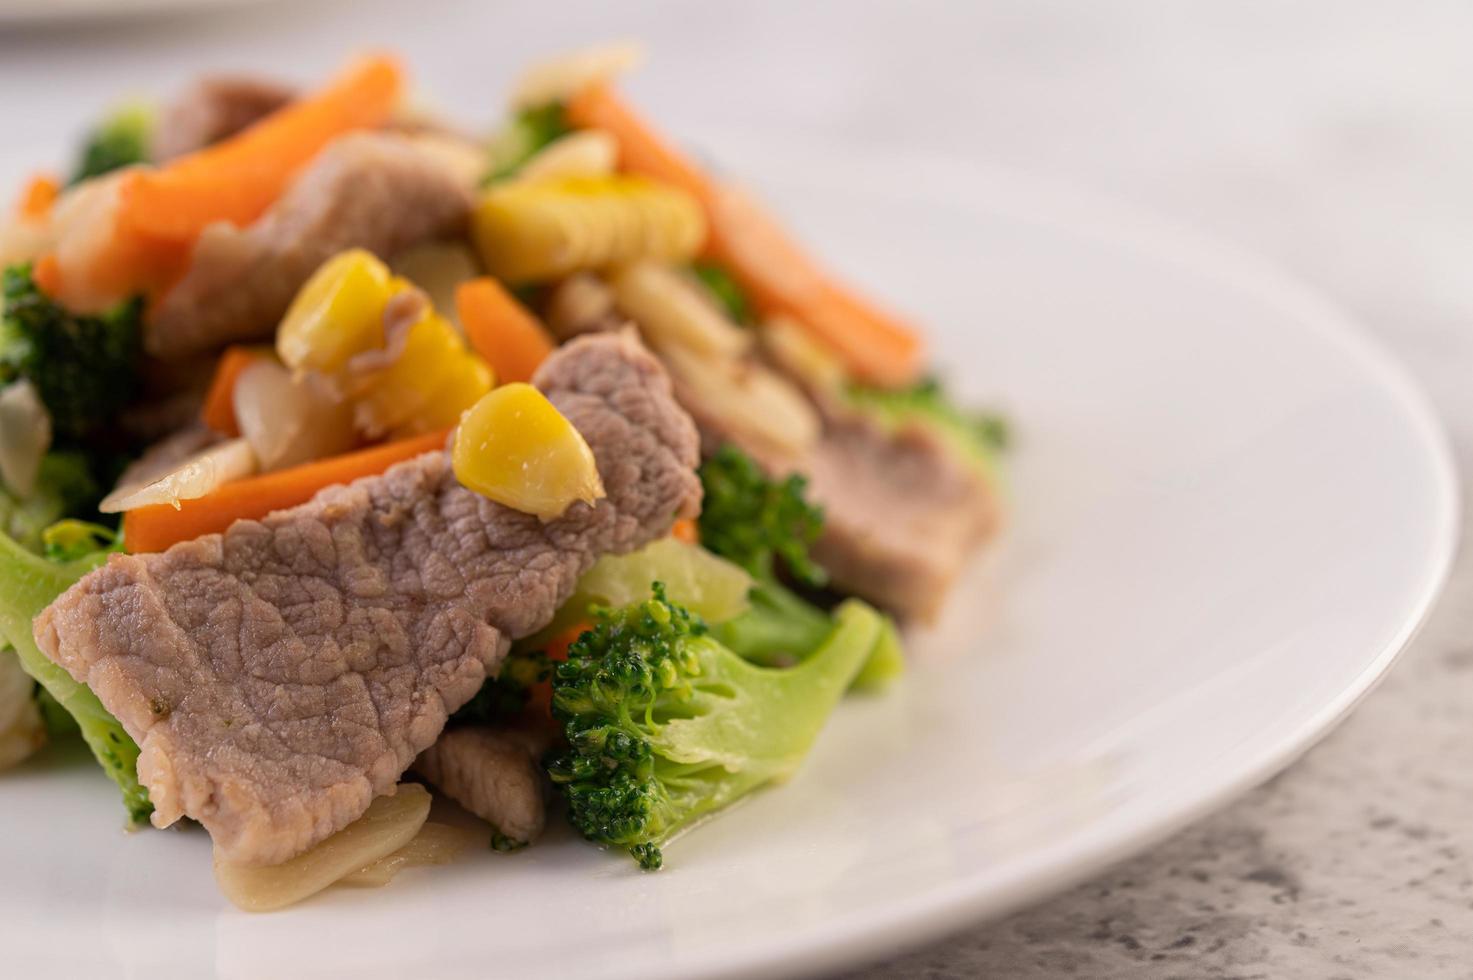 Stir-fried mixed vegetables with pork photo